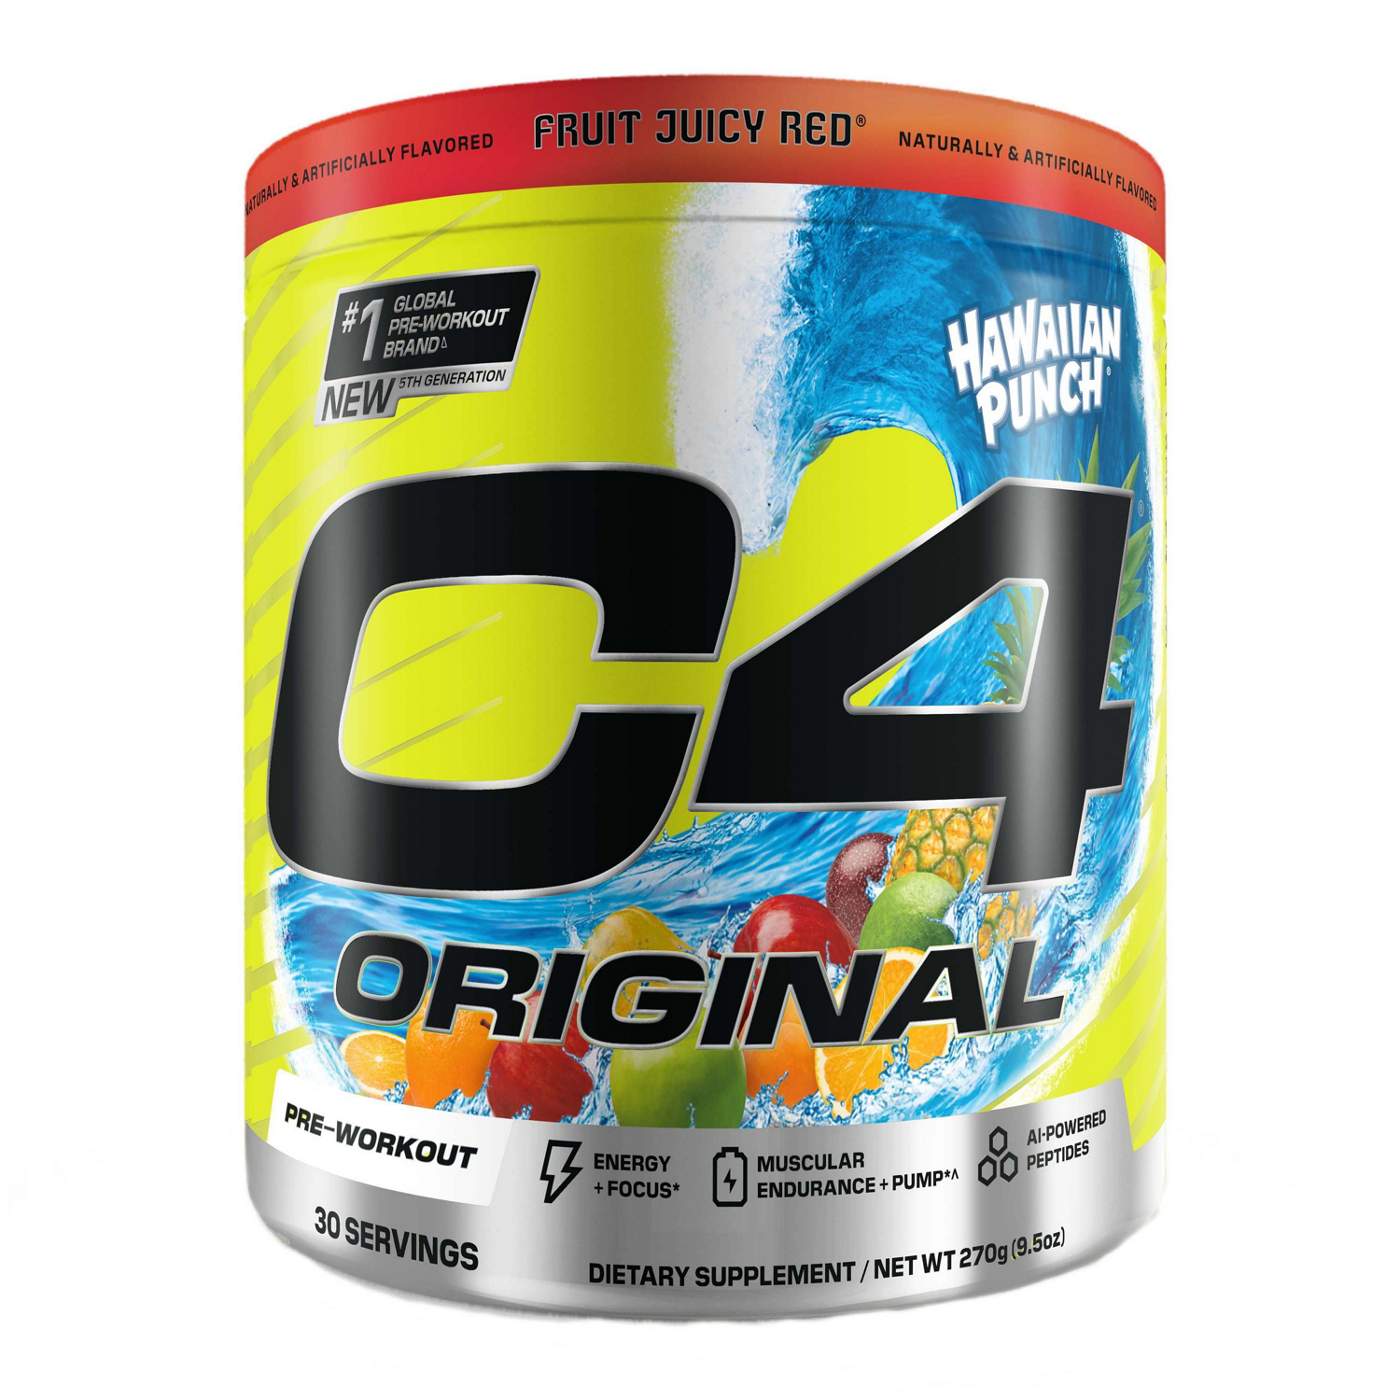 Cellucor C4 Original Pre-Workout - Hawaiian Punch Fruit Juicy Red; image 1 of 6